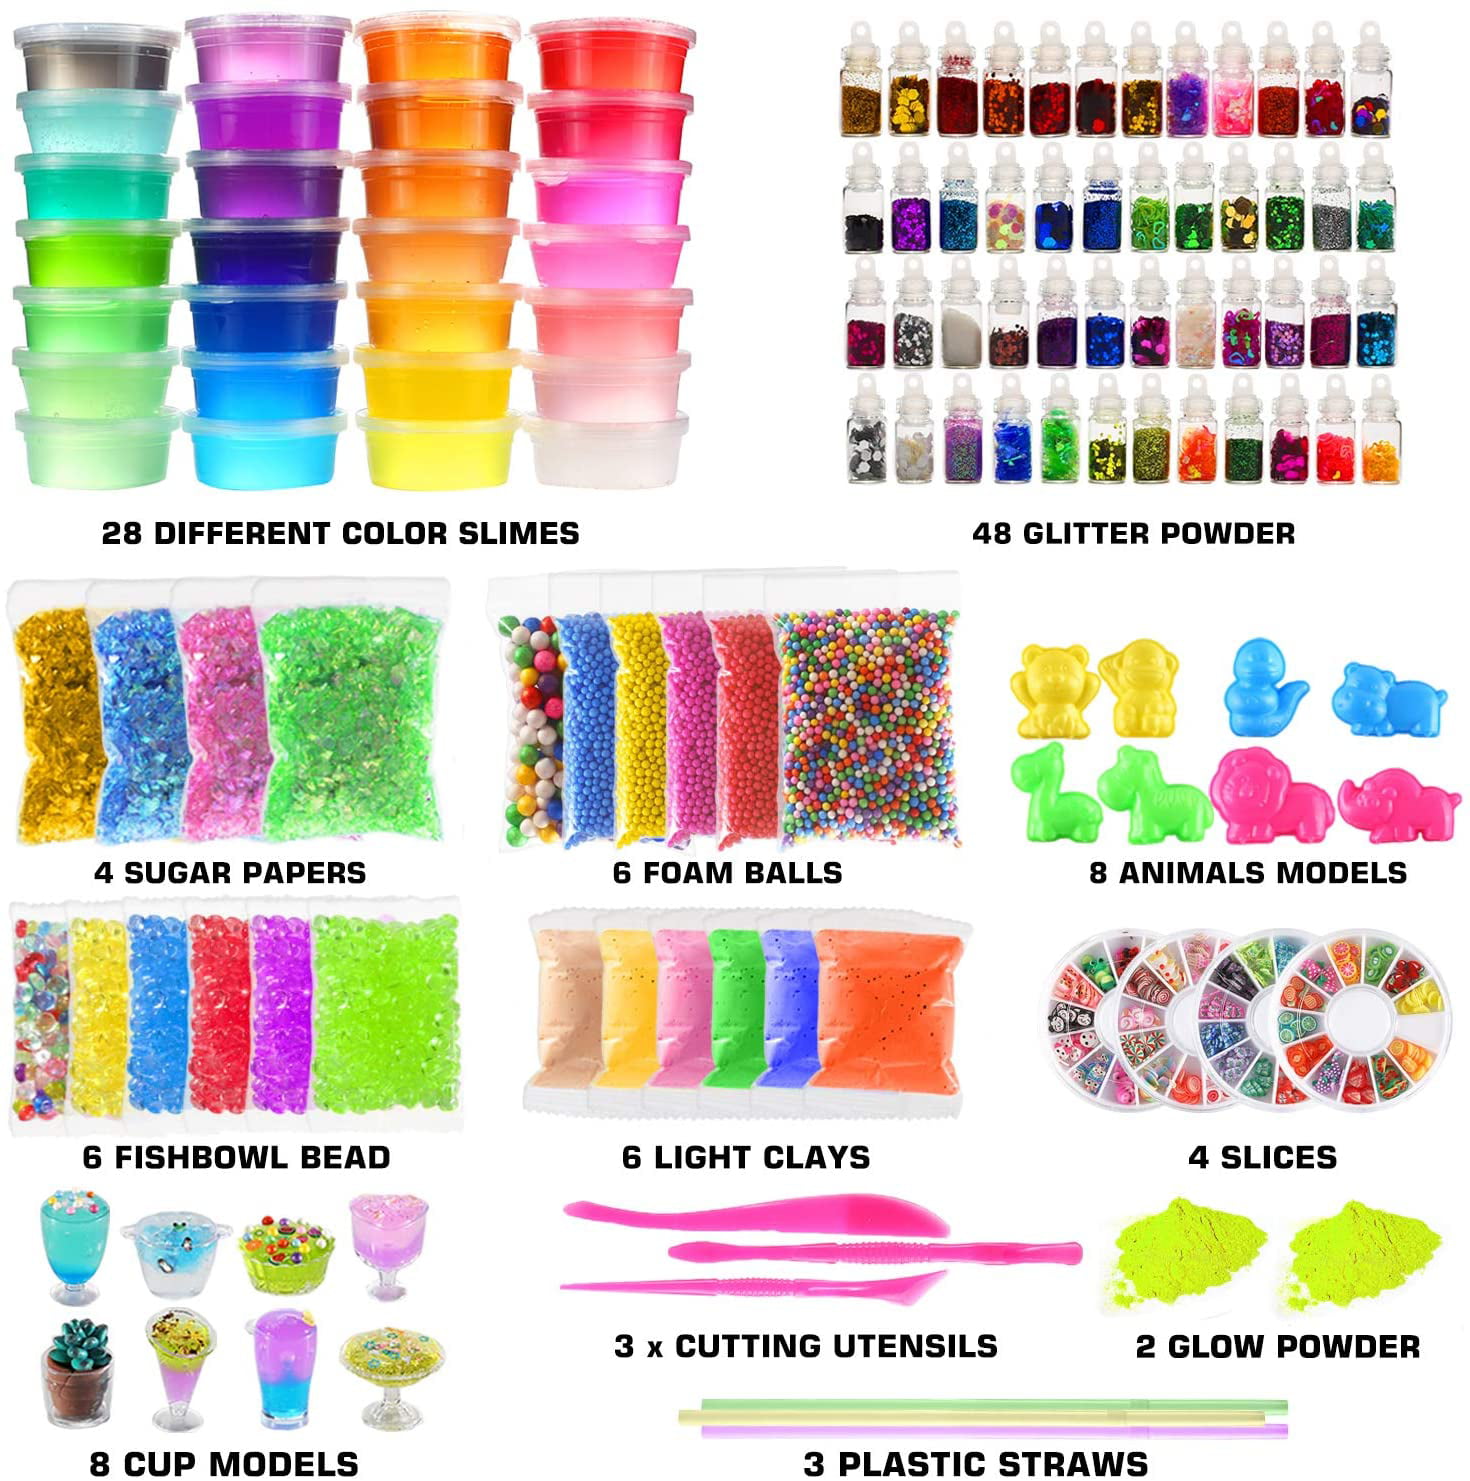 DIY Slime Kit Schleim Selber Machen with 24 Colors Crystal Clear Slime,Glitter 